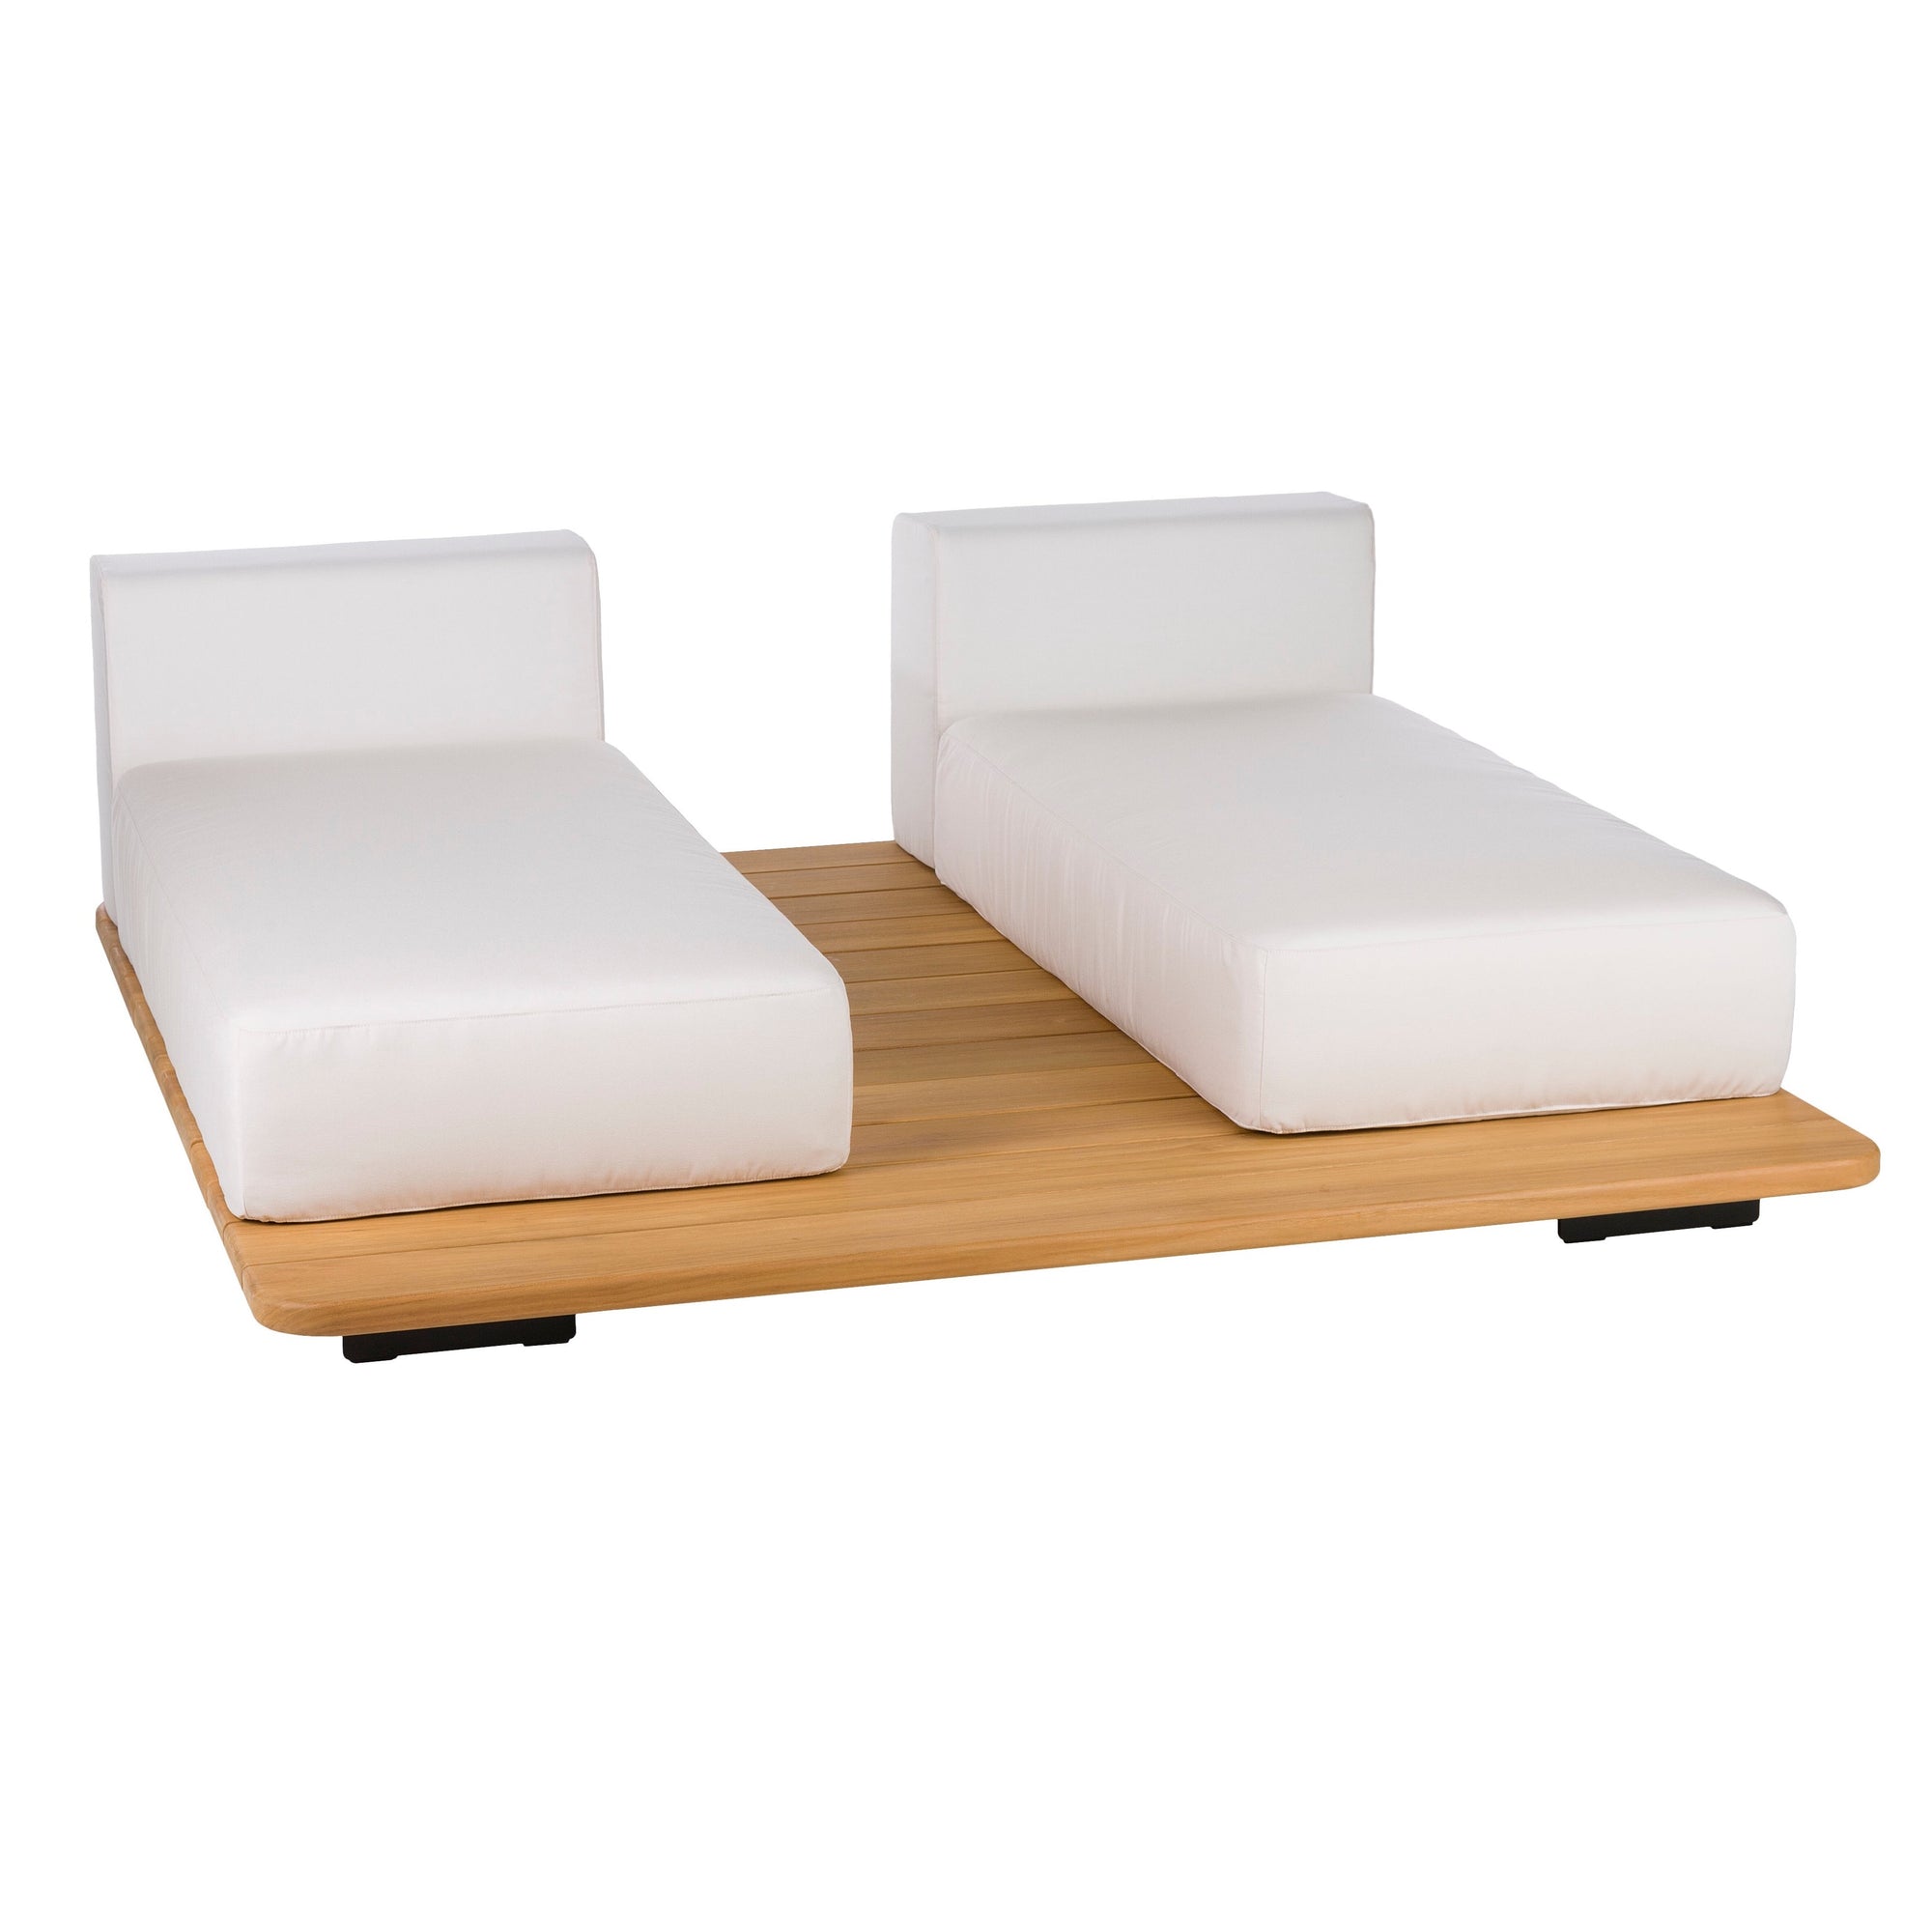 Point Pal double lounger